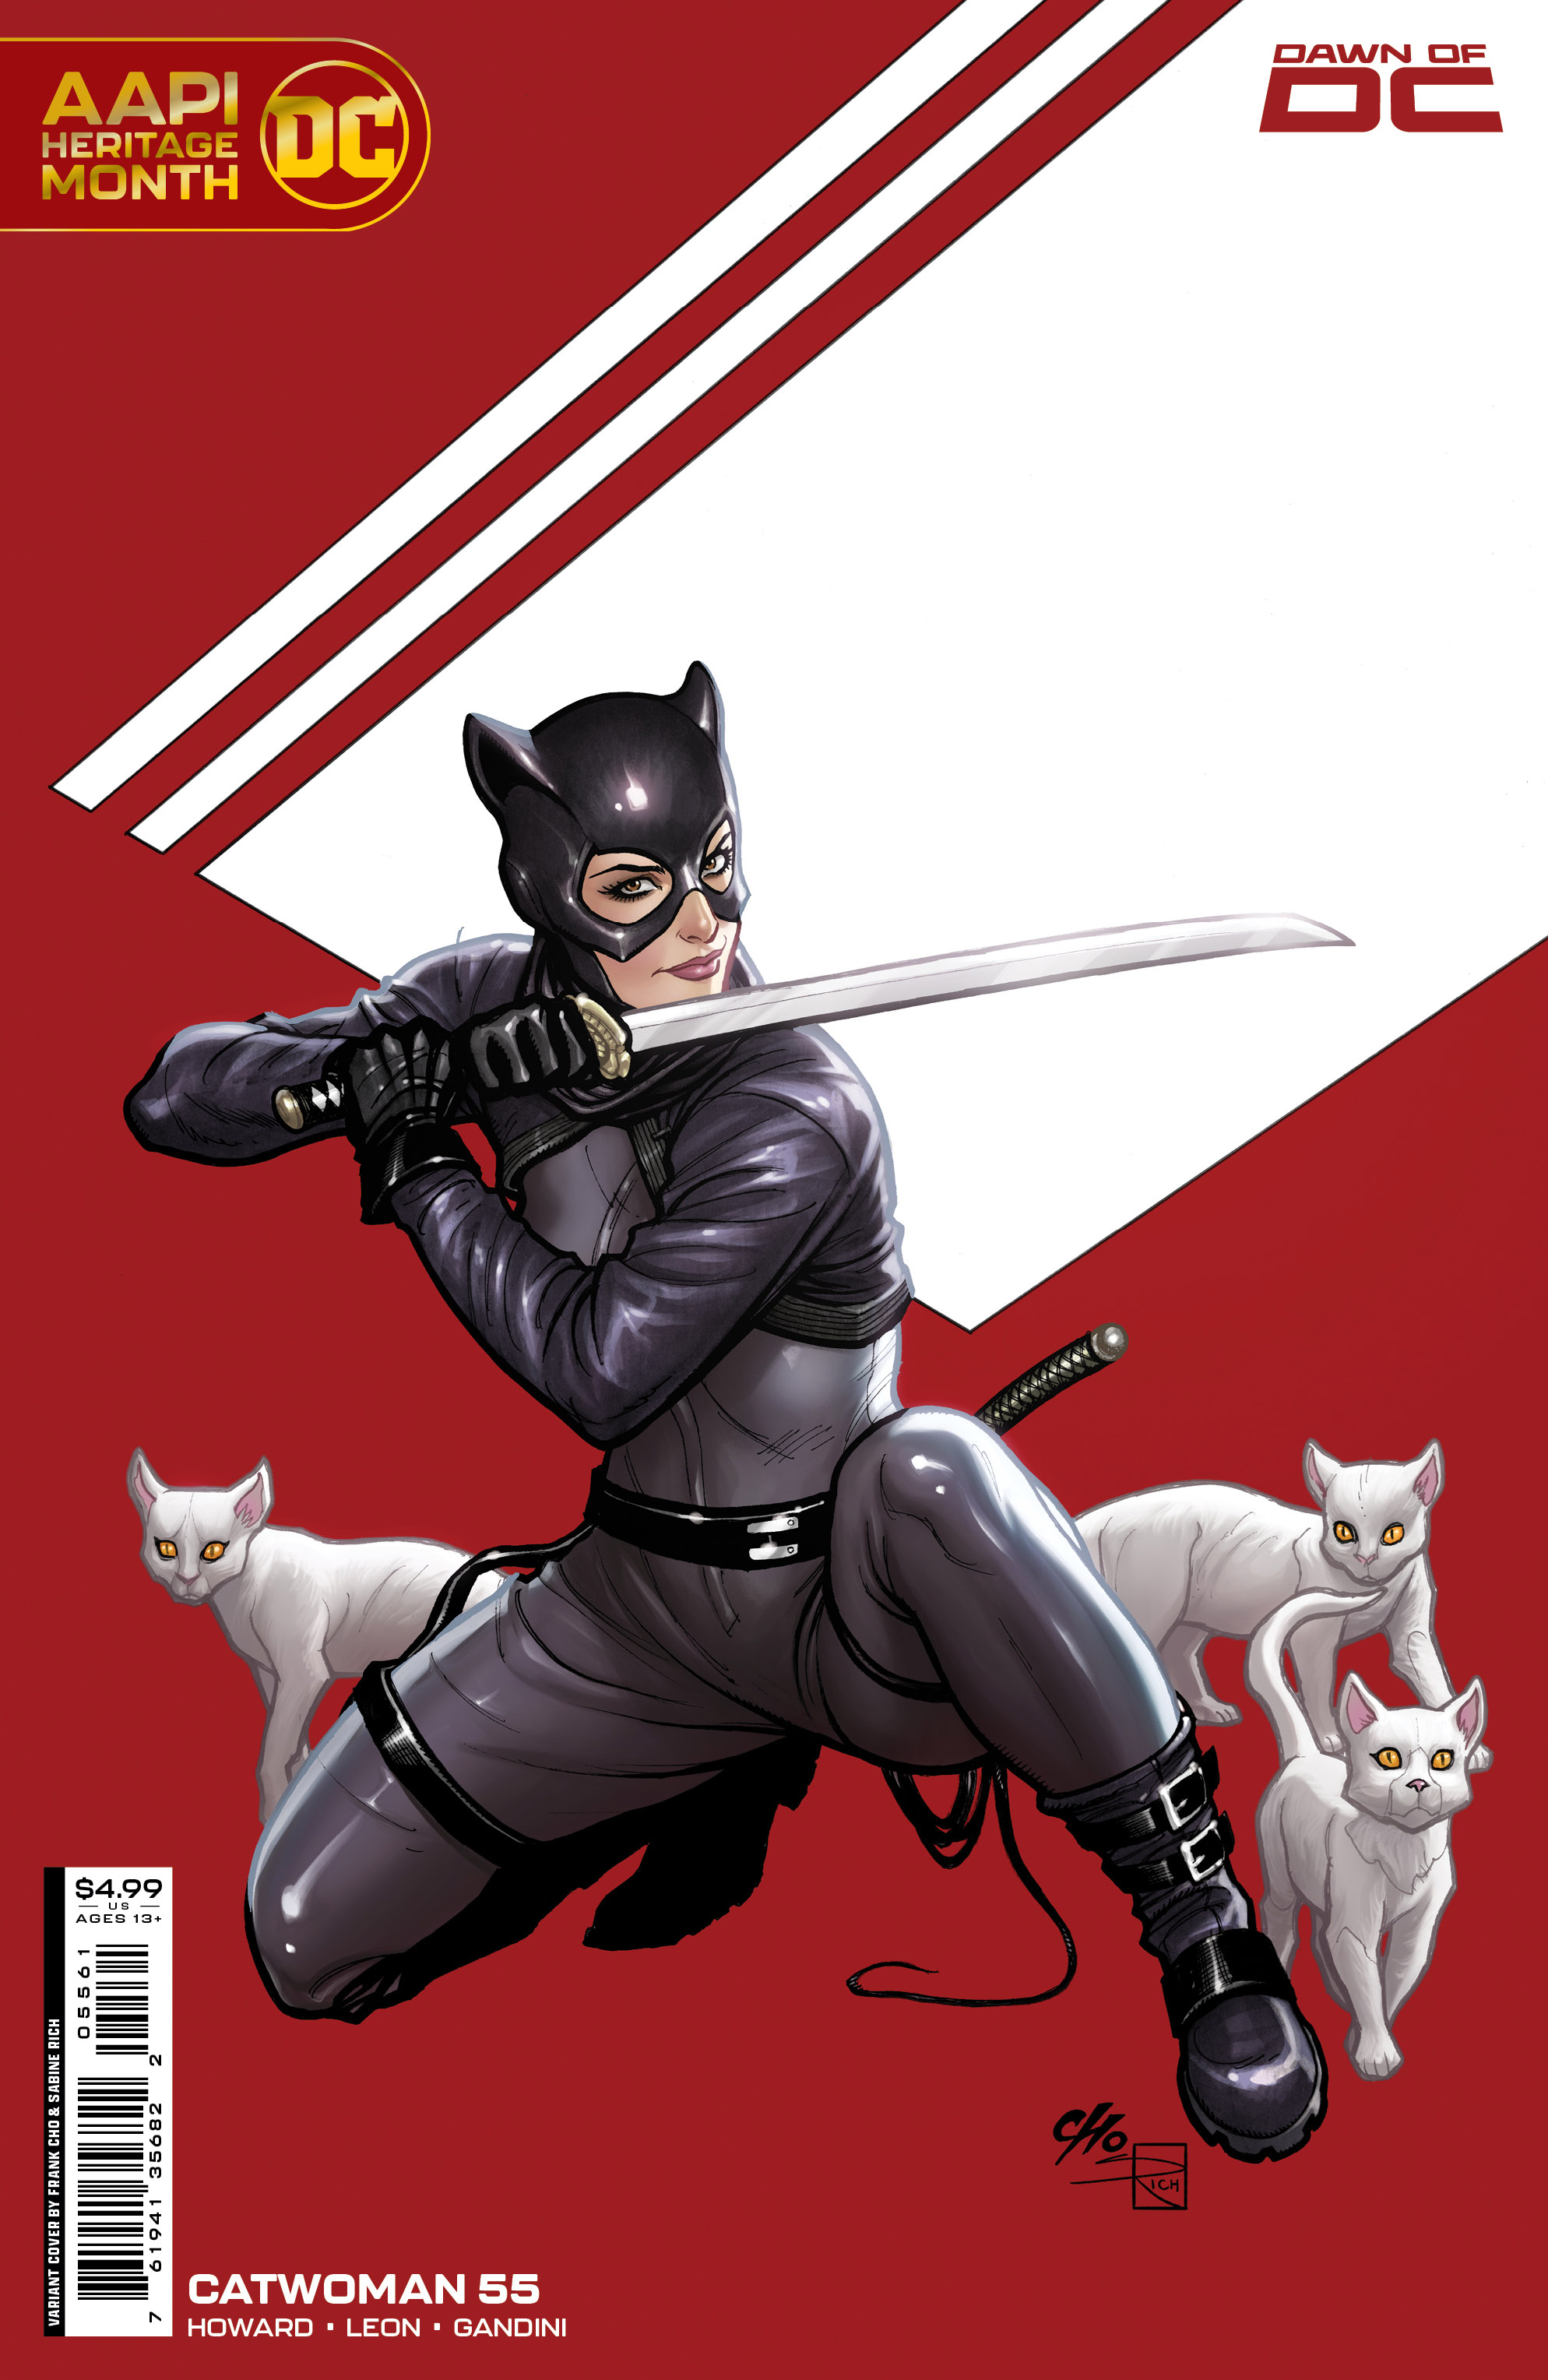 Catwoman #55 Cover D Frank Cho Aapi Heritage Month Card Stock Variant (2018)